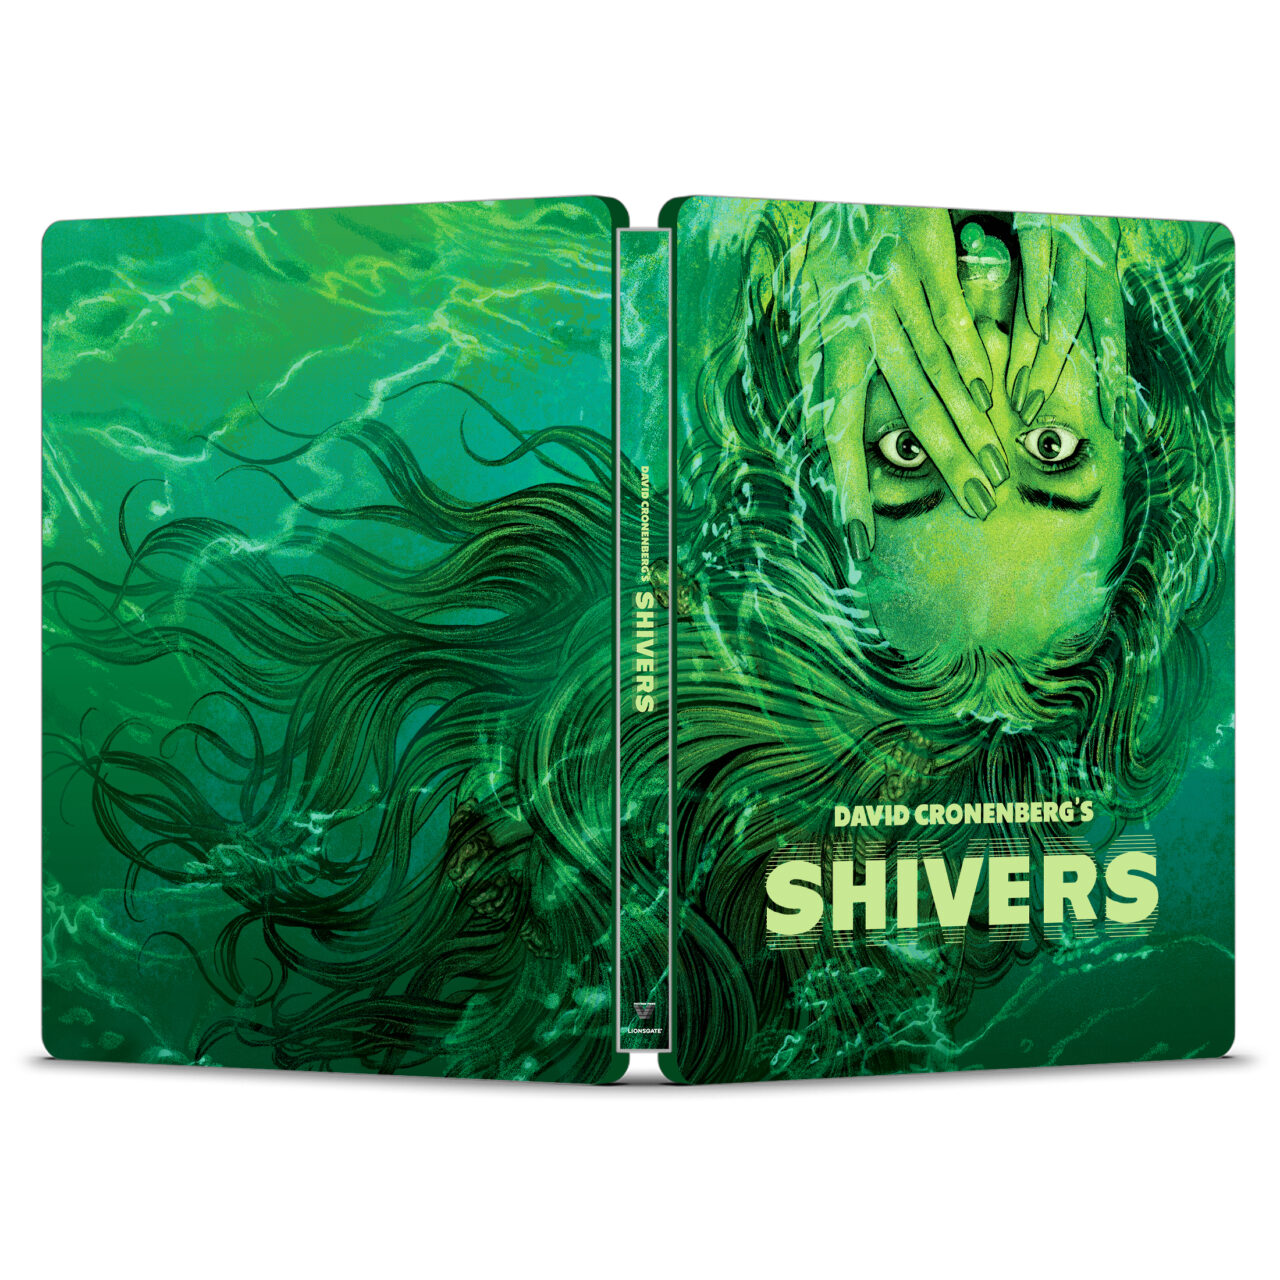 Shivers Blu-Ray Steelbook Combo Pack cover (Lionsgate)